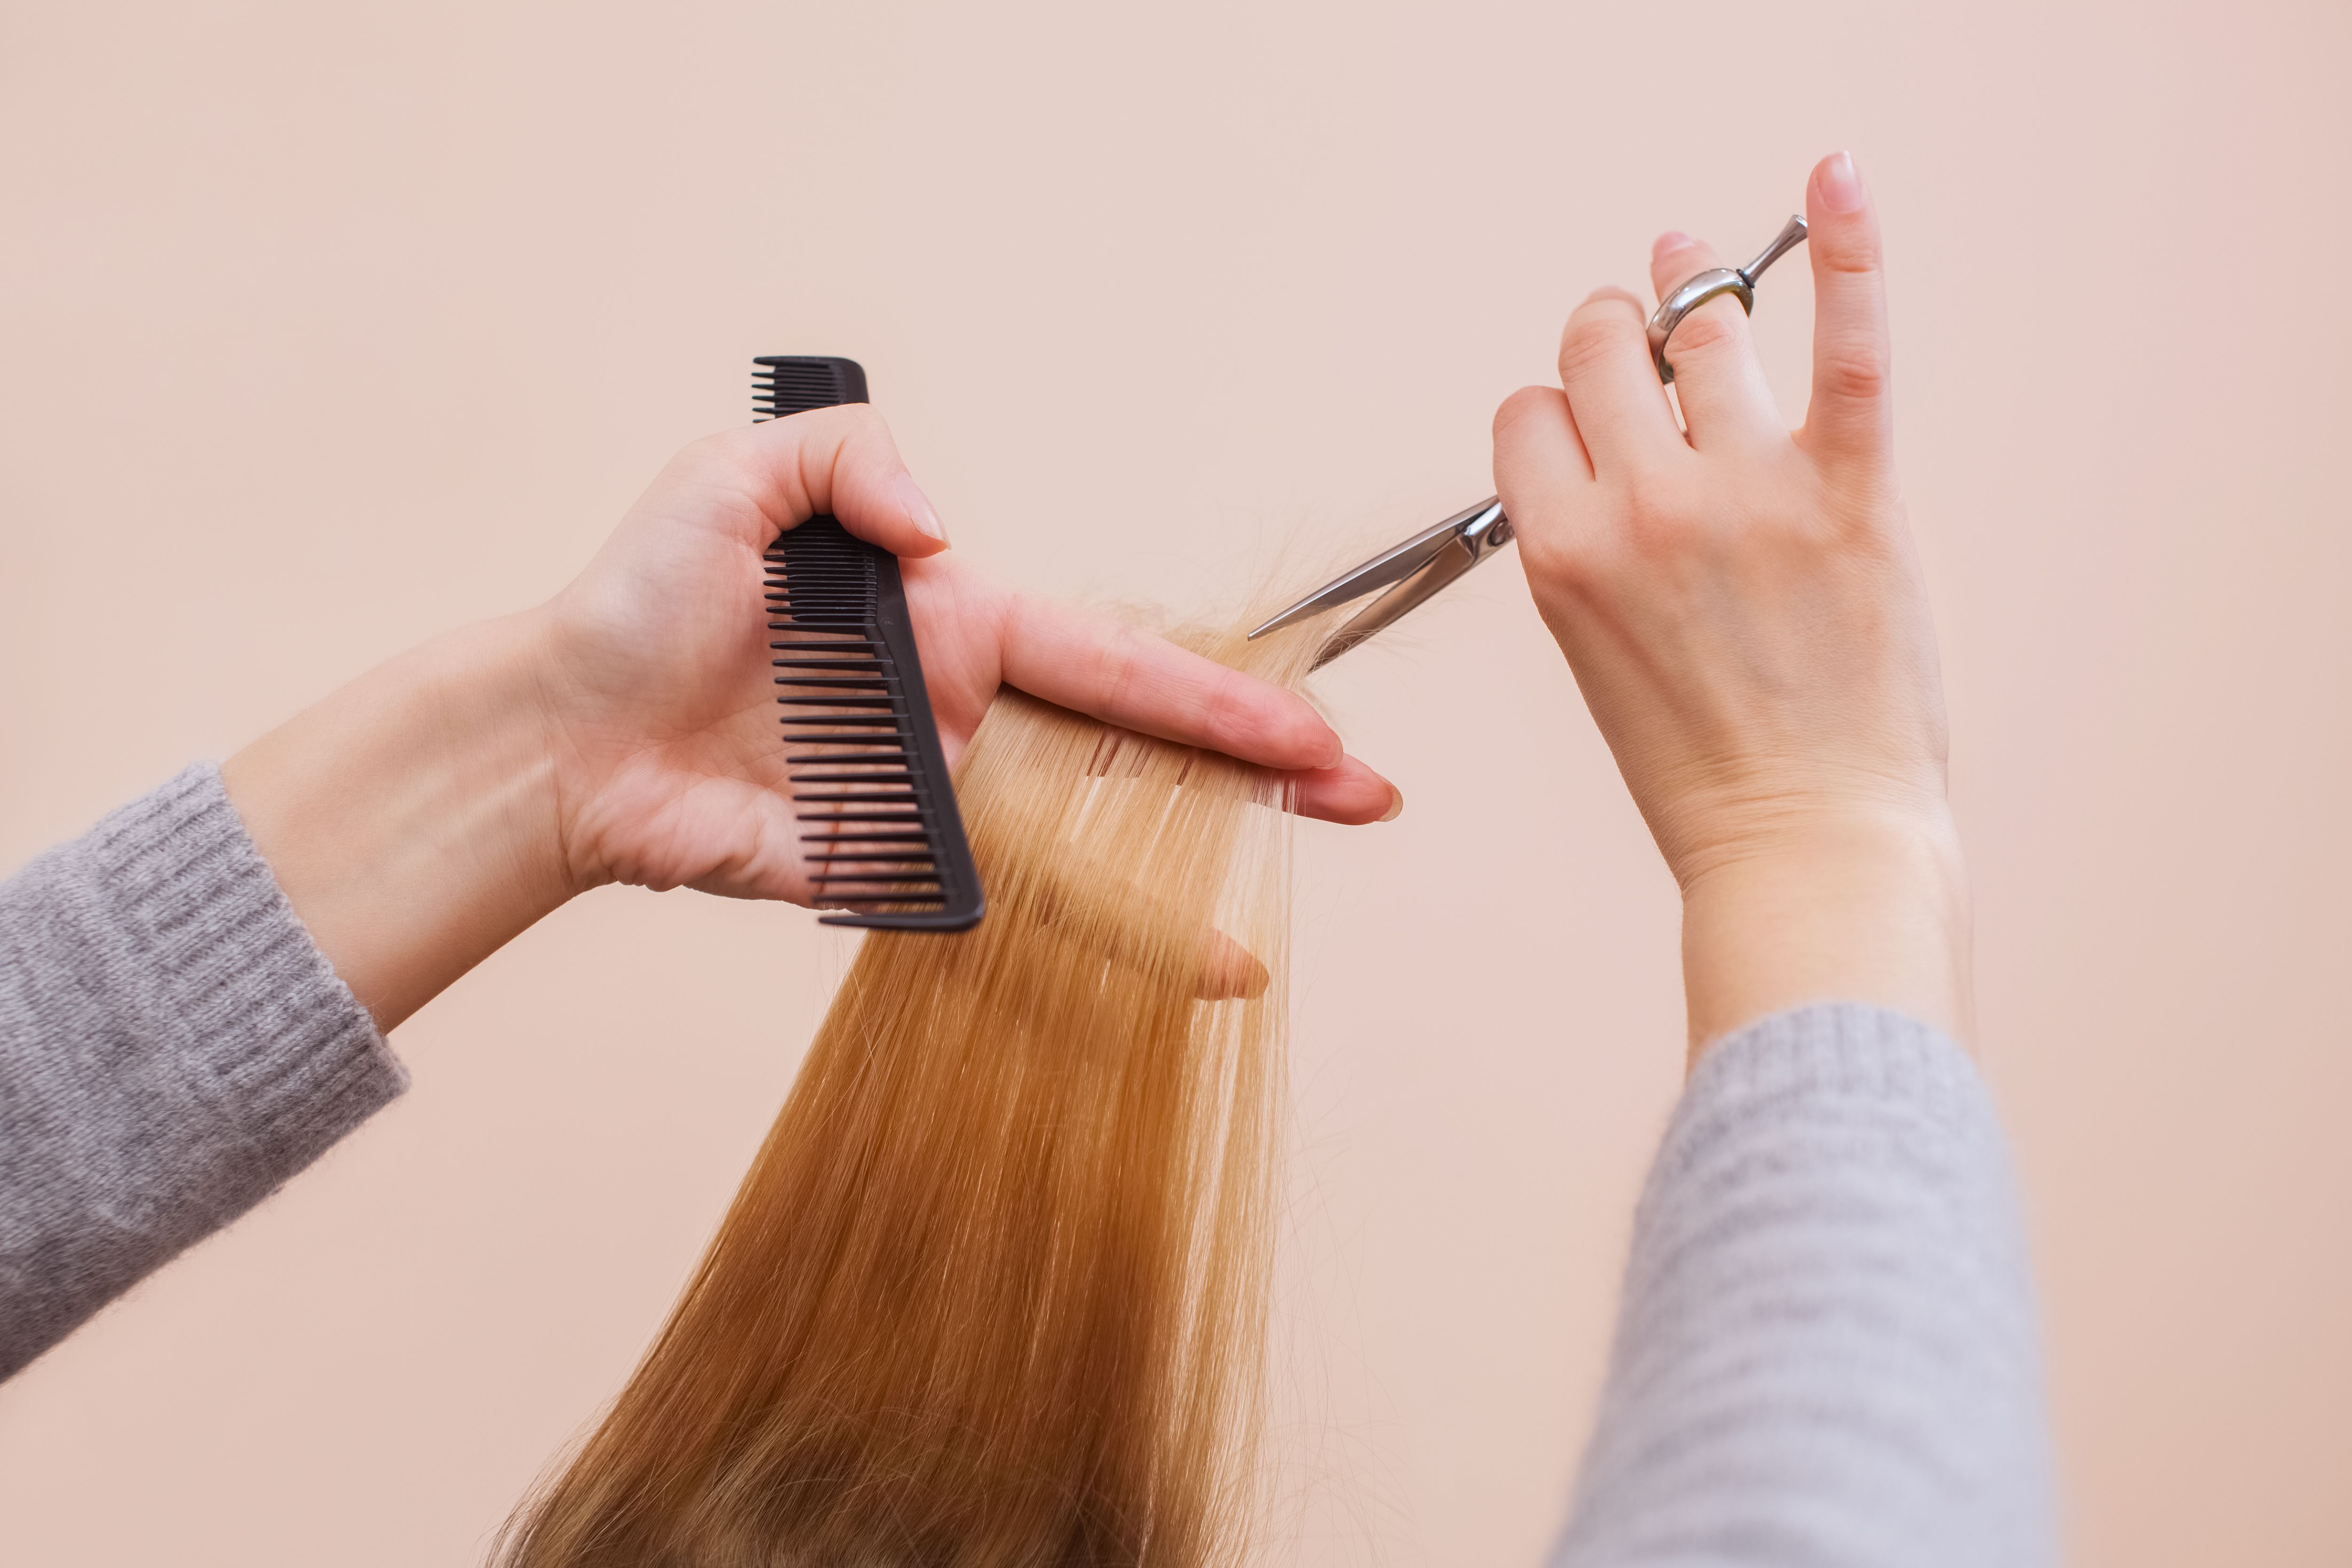 How to cut your own hair at home, according to experts